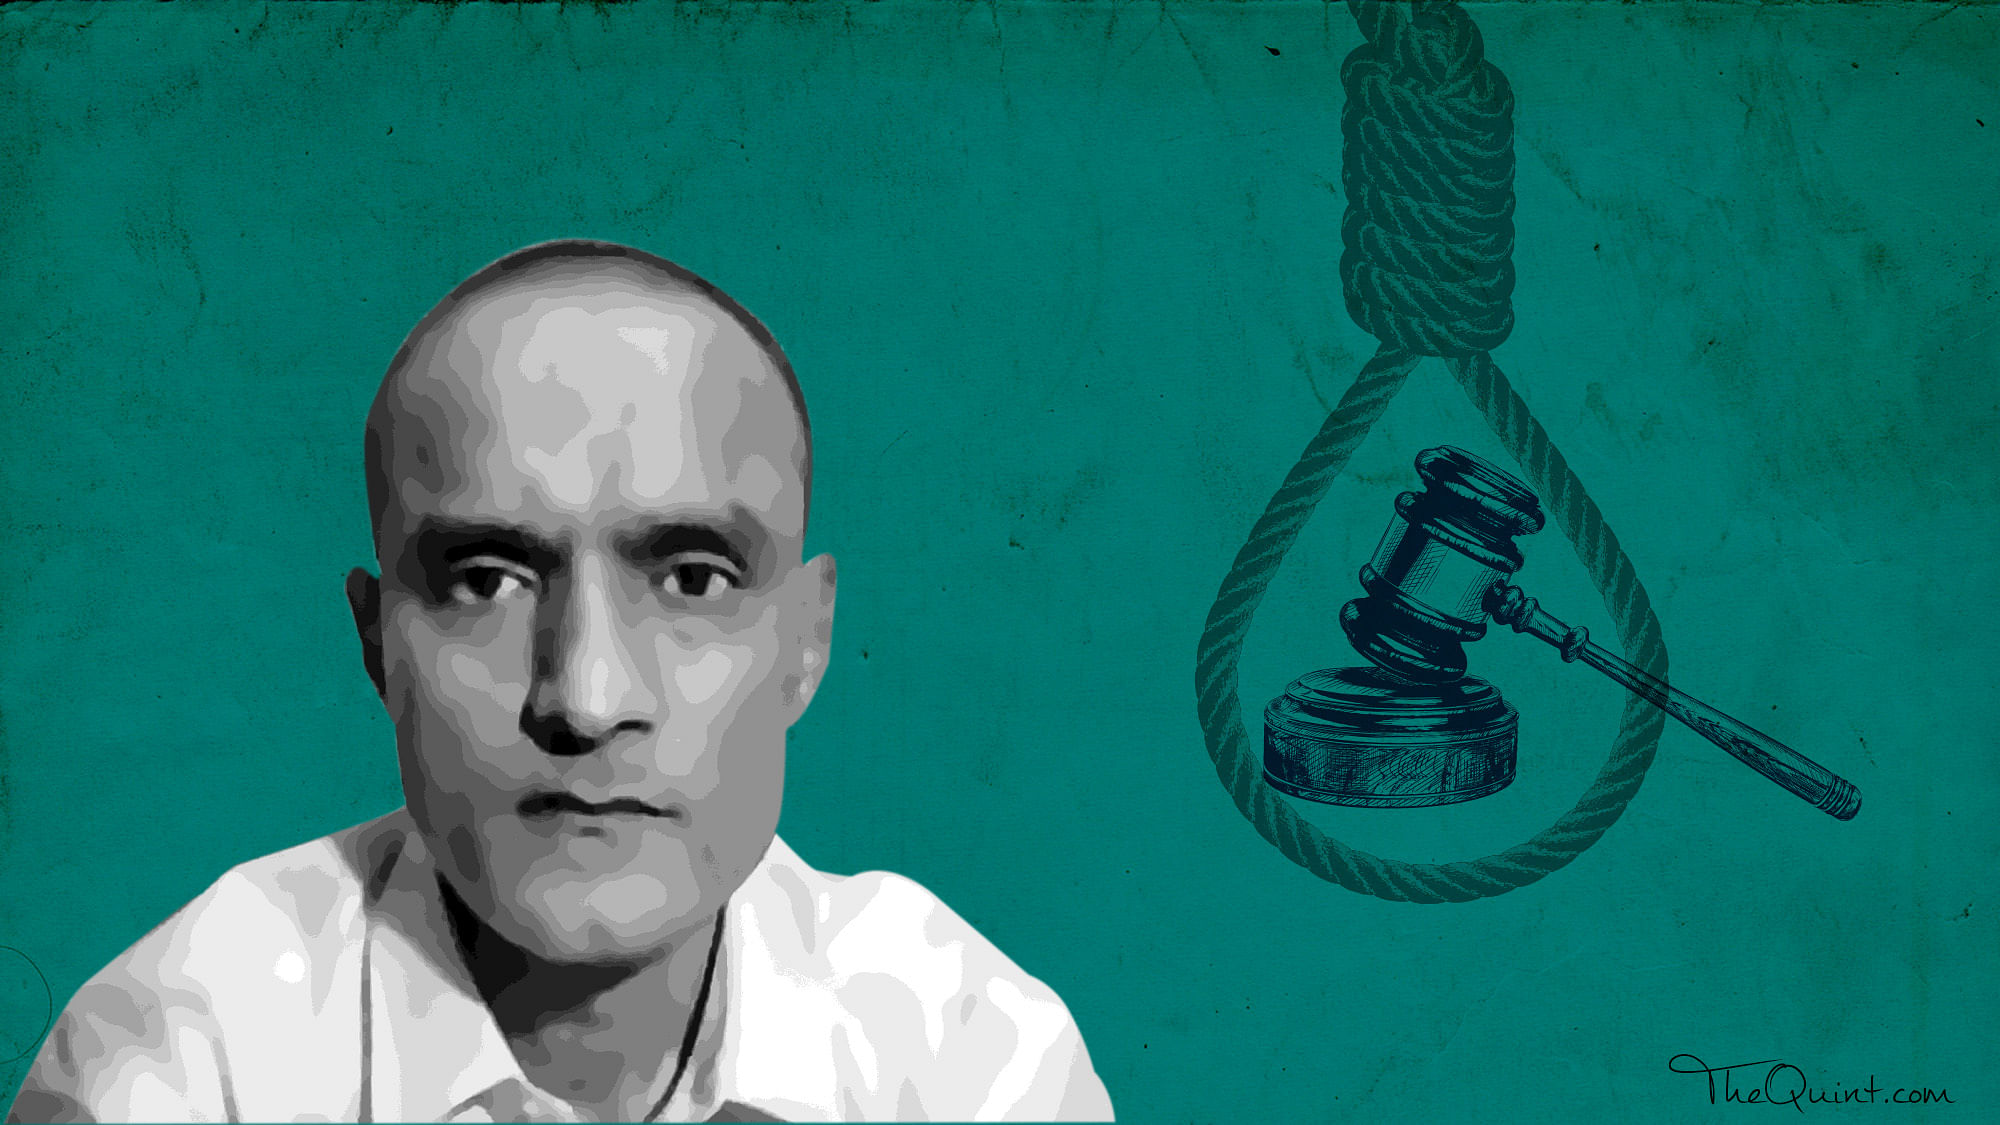 Pakistan on Thursday claimed that the International Court of Justice had rejected India’s request for six months to file a plea on the Kulbhushan Jadhav case. (Photo: <b>The Quint</b>)